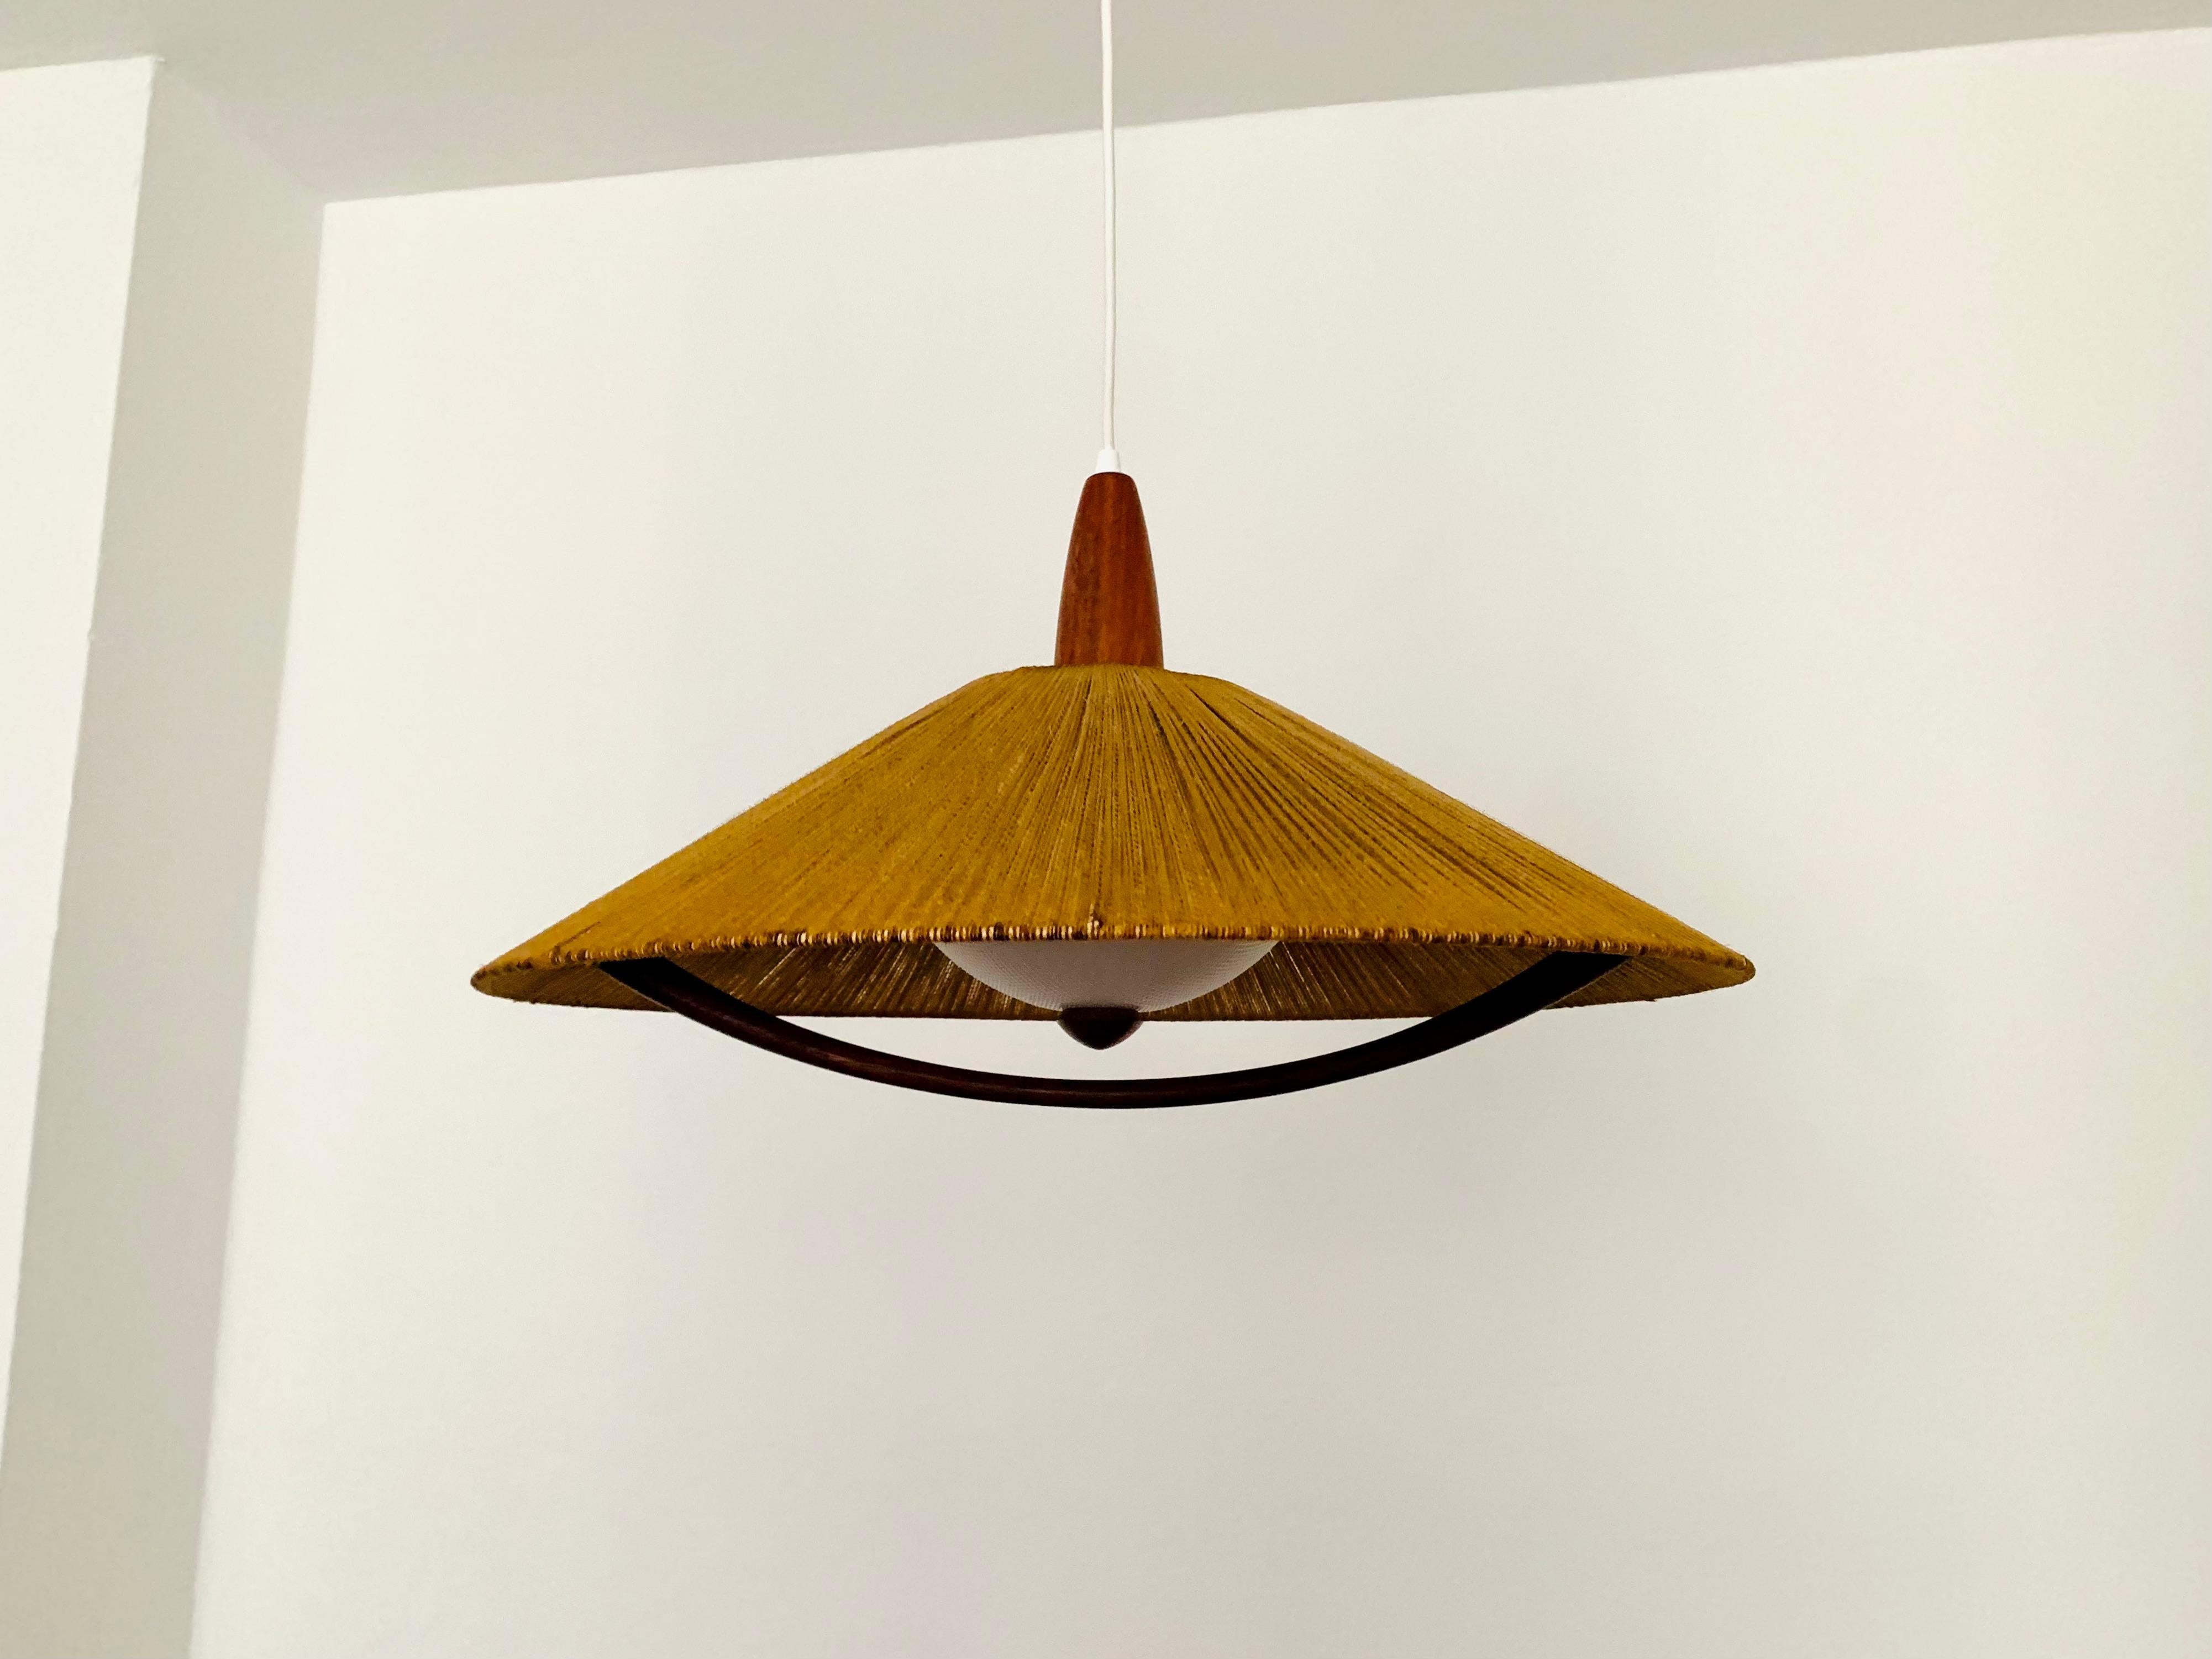 Exceptionally beautiful and large pendant lamp from the 1960s.
The design is very unusual.
The shape and the materials create a warm and very pleasant light.
The teak details are beautifully shaped.

Condition:

Good vintage condition with